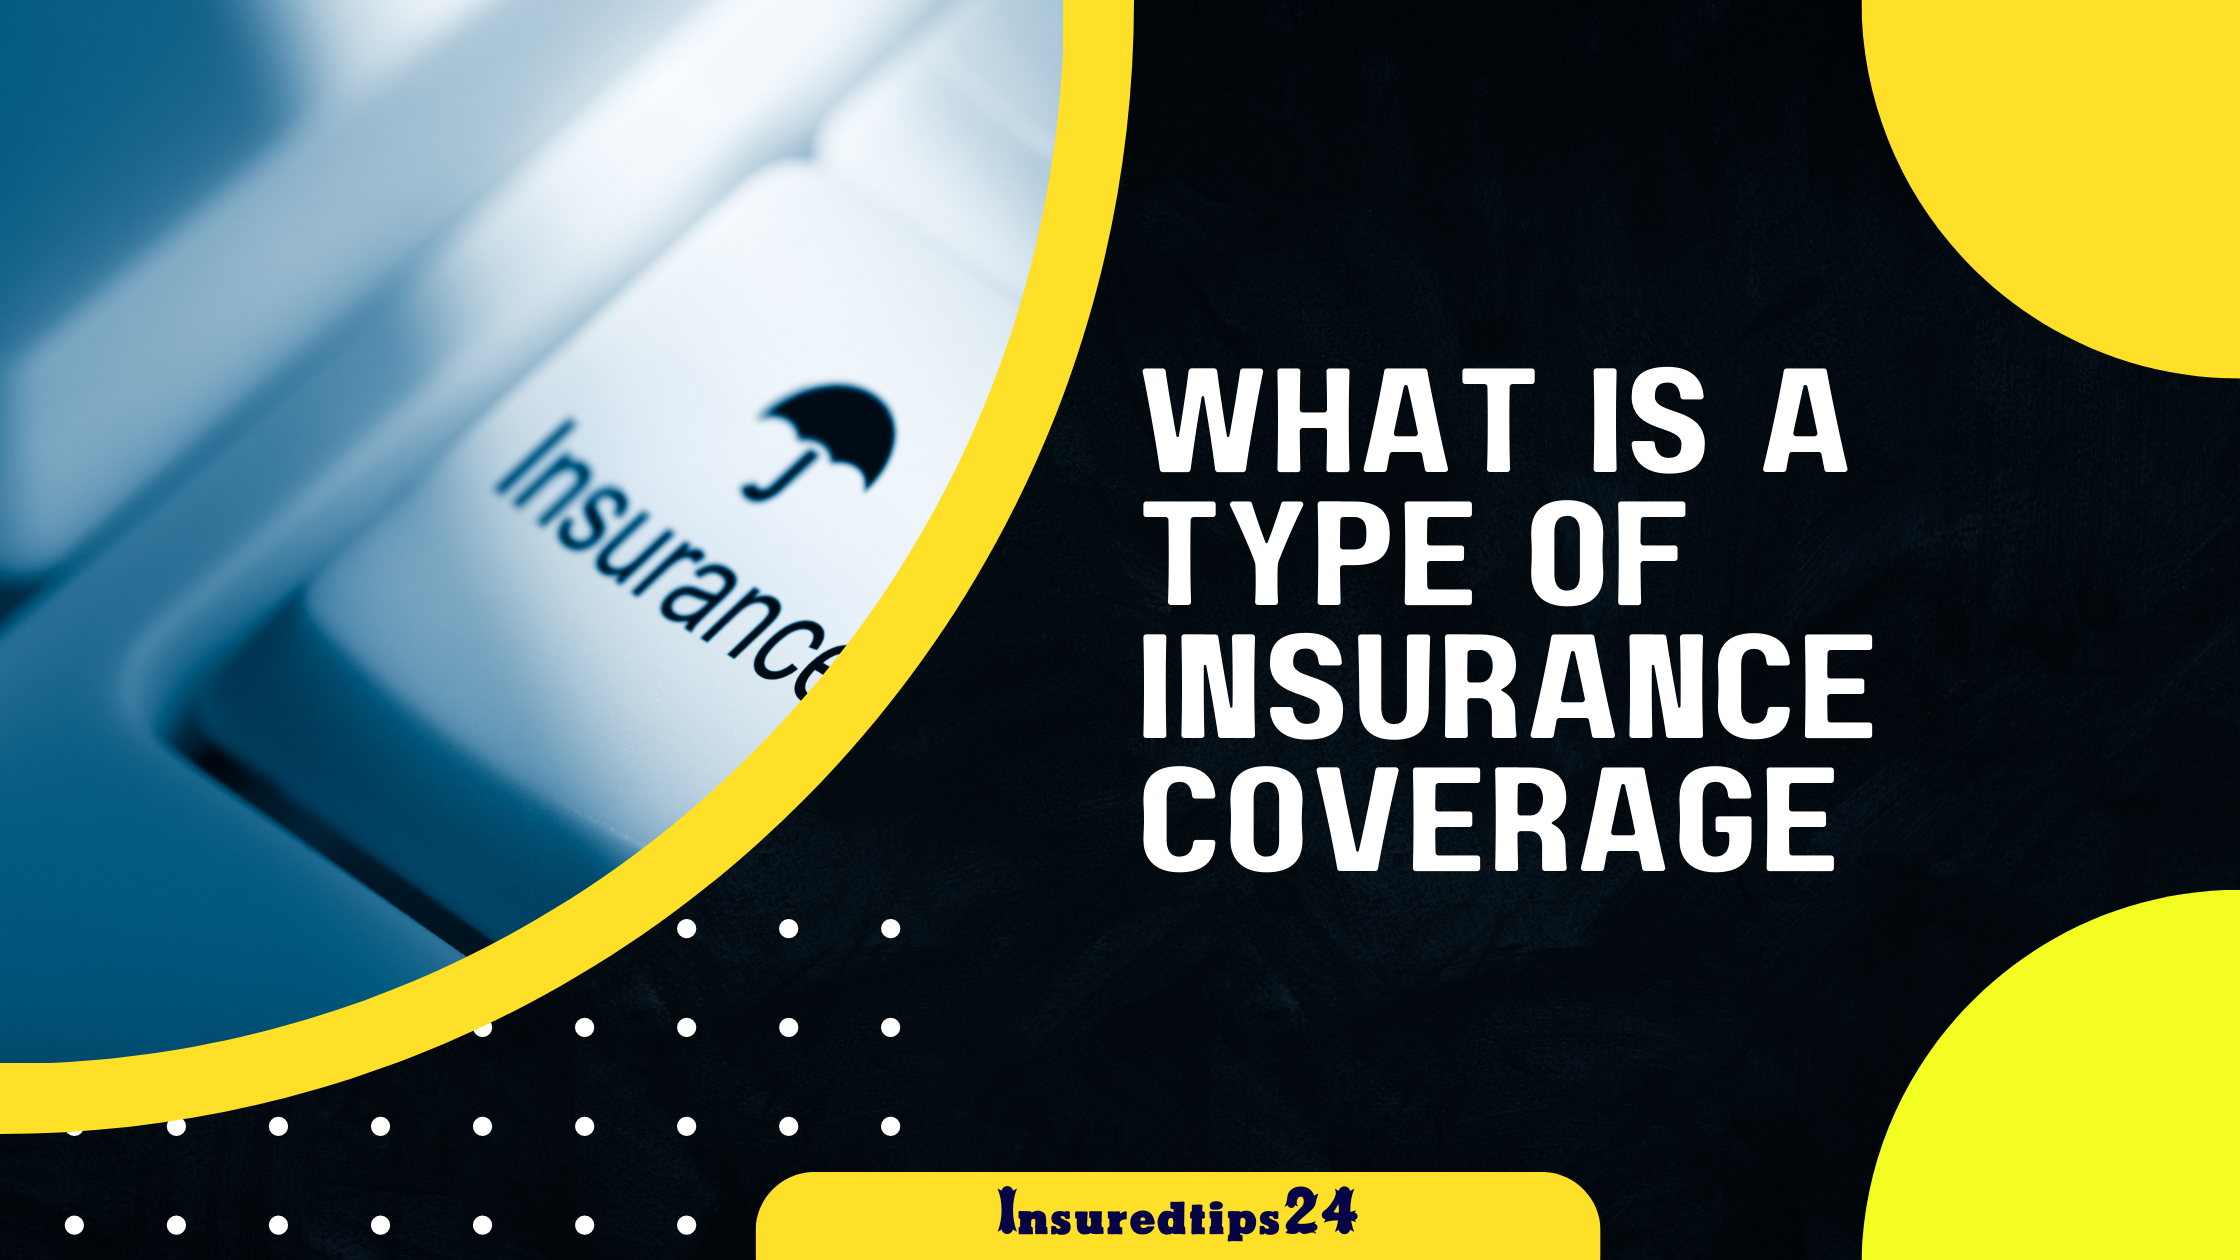 What is a type of insurance coverage?